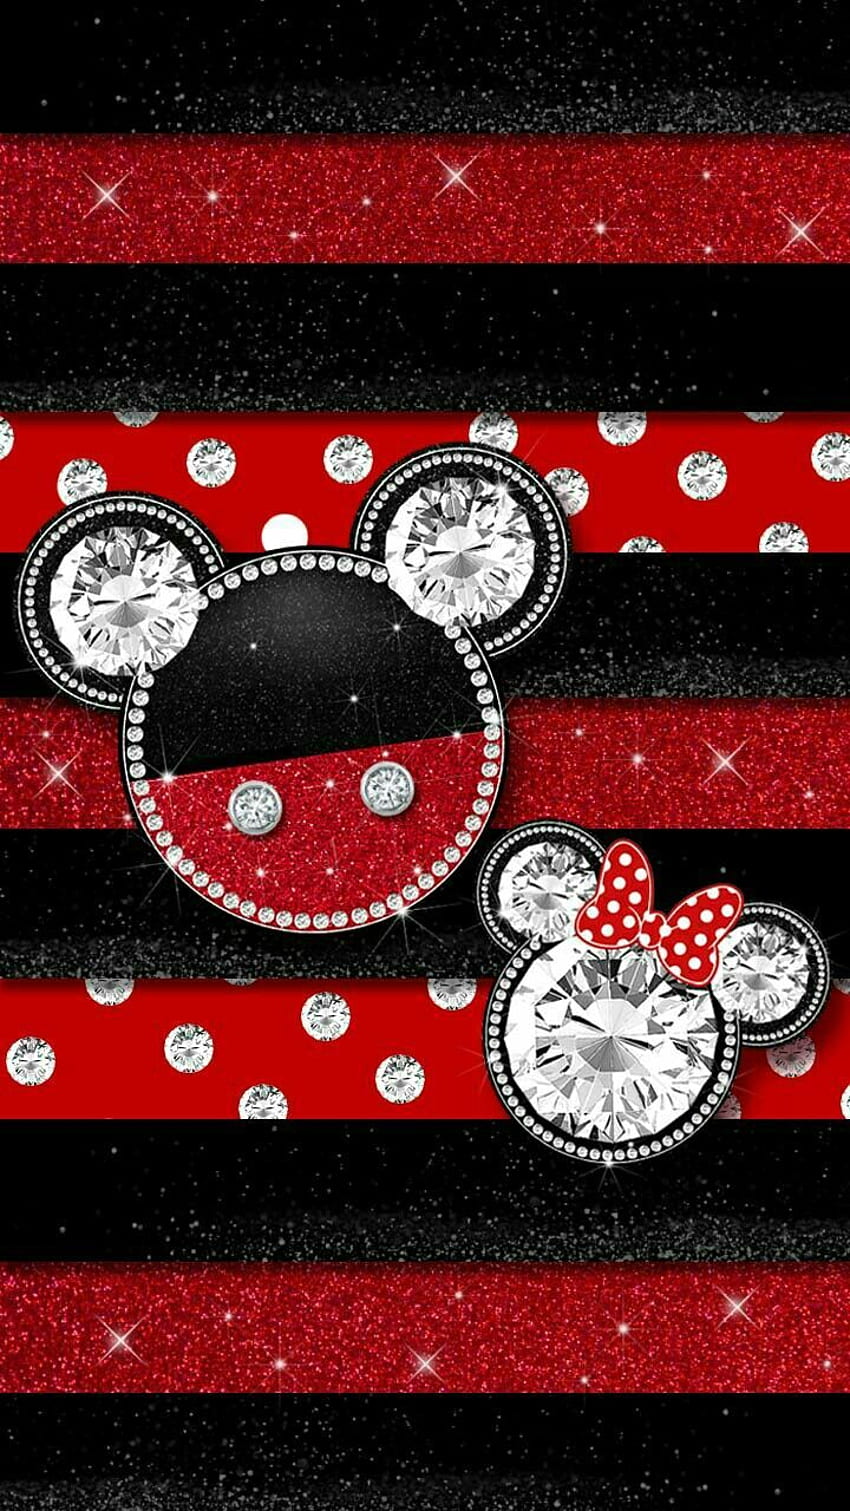 Baby Minnie Mouse Hd Wallpaper Source  Baby Mickey Mouse Sick  500x500  PNG Download  PNGkit